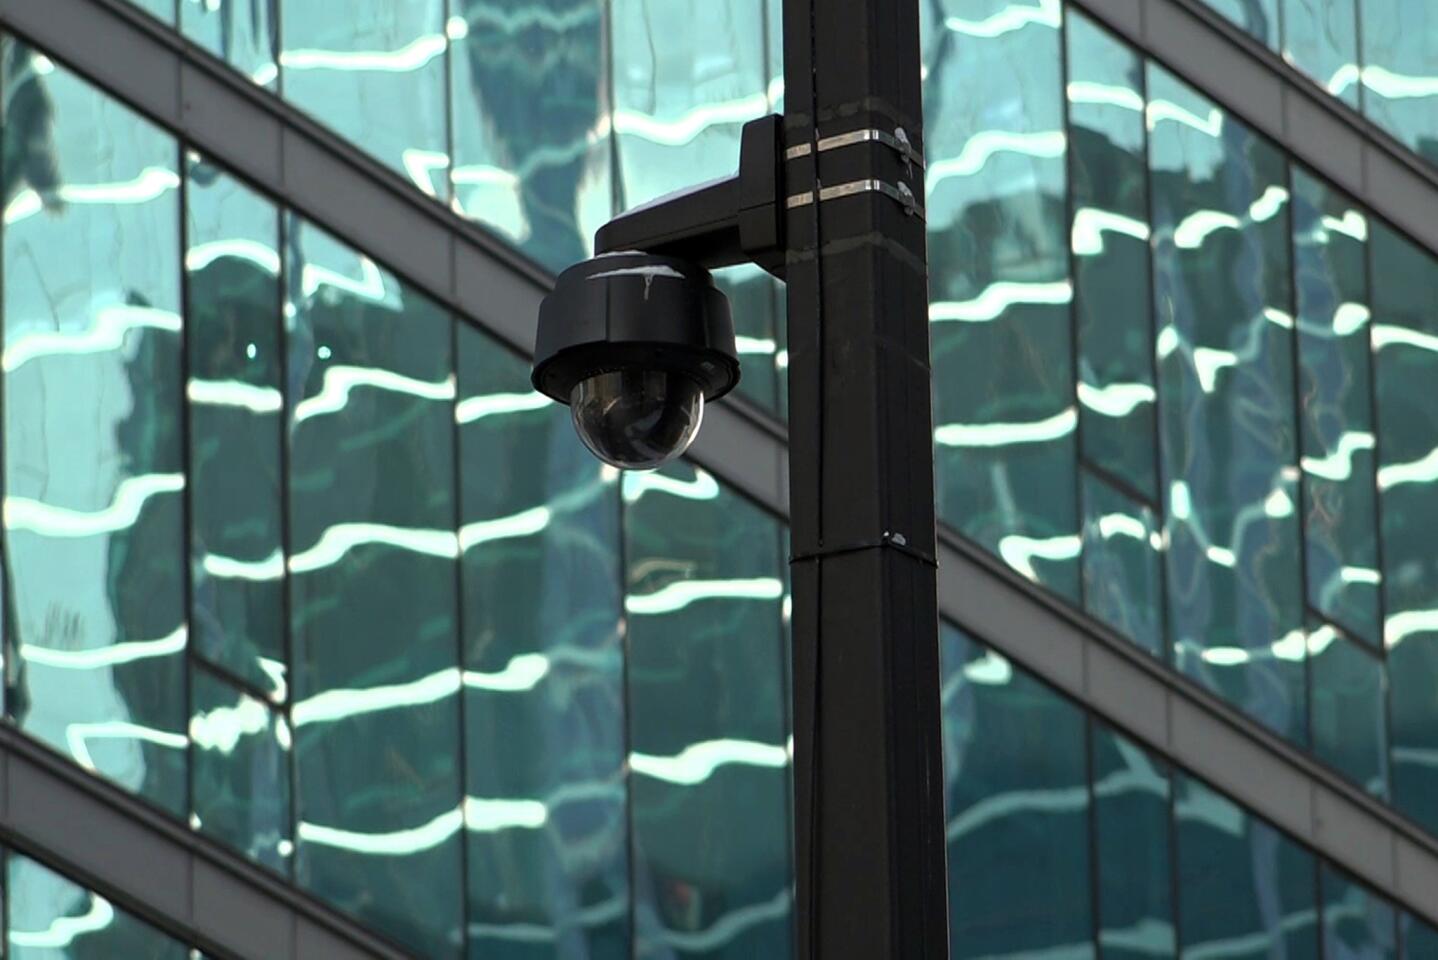 A surveillance camera is seen near the spot where "Empire" actor Jussie Smollett allegedly staged an attack in Chicago. Chicago police tapped into a vast network of surveillance cameras _ and some homeowners' doorbell cameras _ to help determine the identities of two brothers who later claimed they were paid by "Empire" actor Jussie Smollett to stage a racist and homophobic attack.